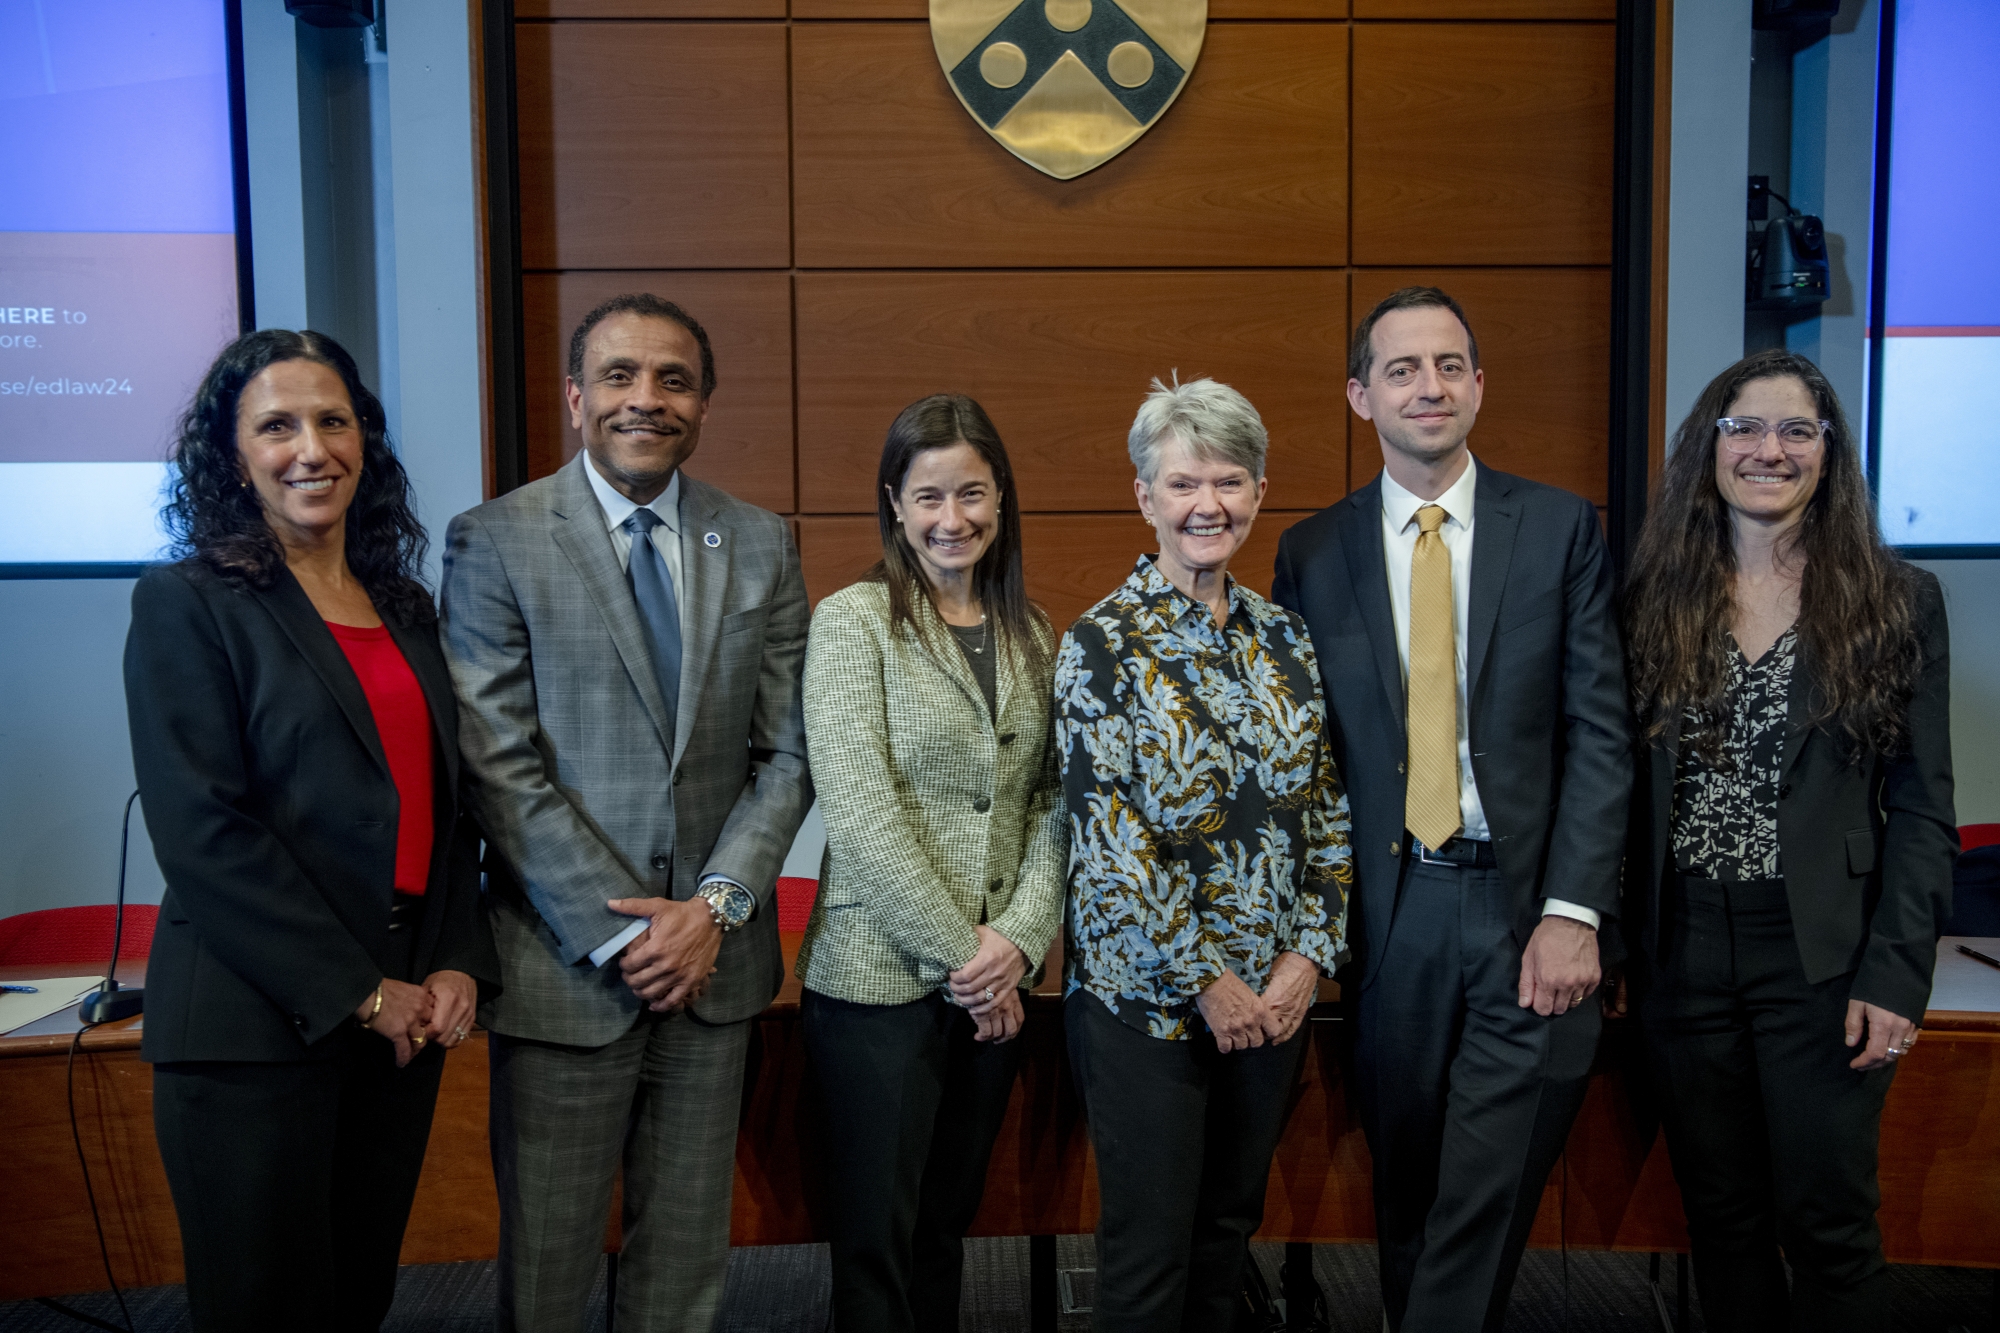 Penn GSE and Penn Carey Law deans stand posing with the panelists from the Goldberg/Christman lecture along with the lecture’s founder and namesake.